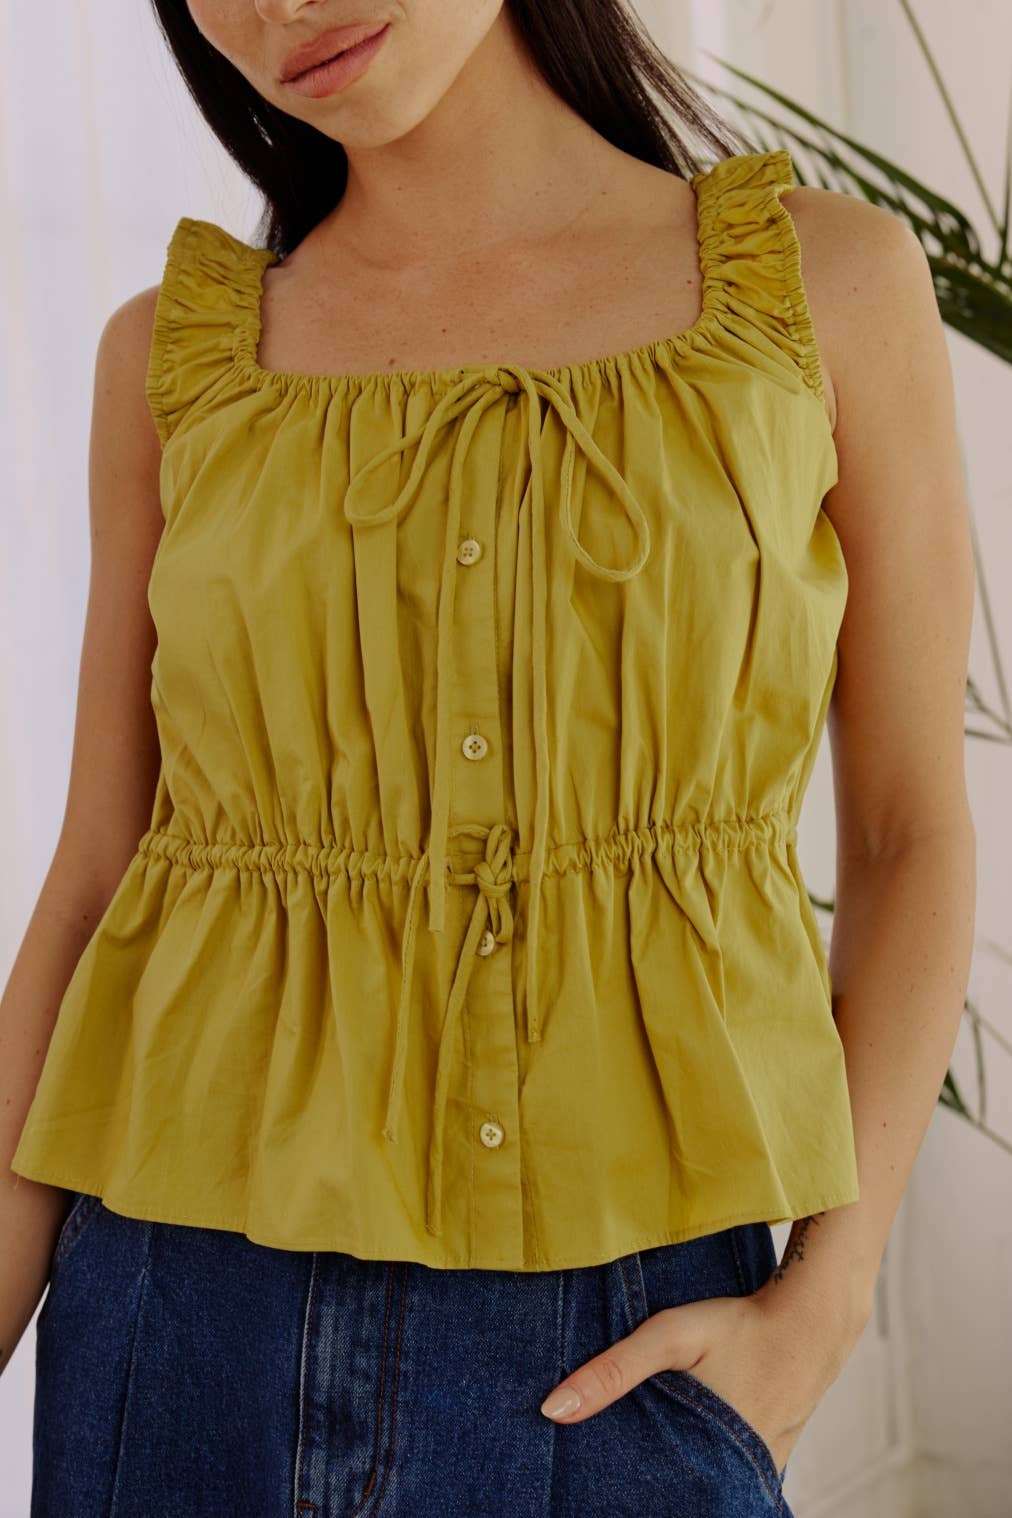 The Darla Top - Gathered Poplin Lime Colored Crop Top Tops